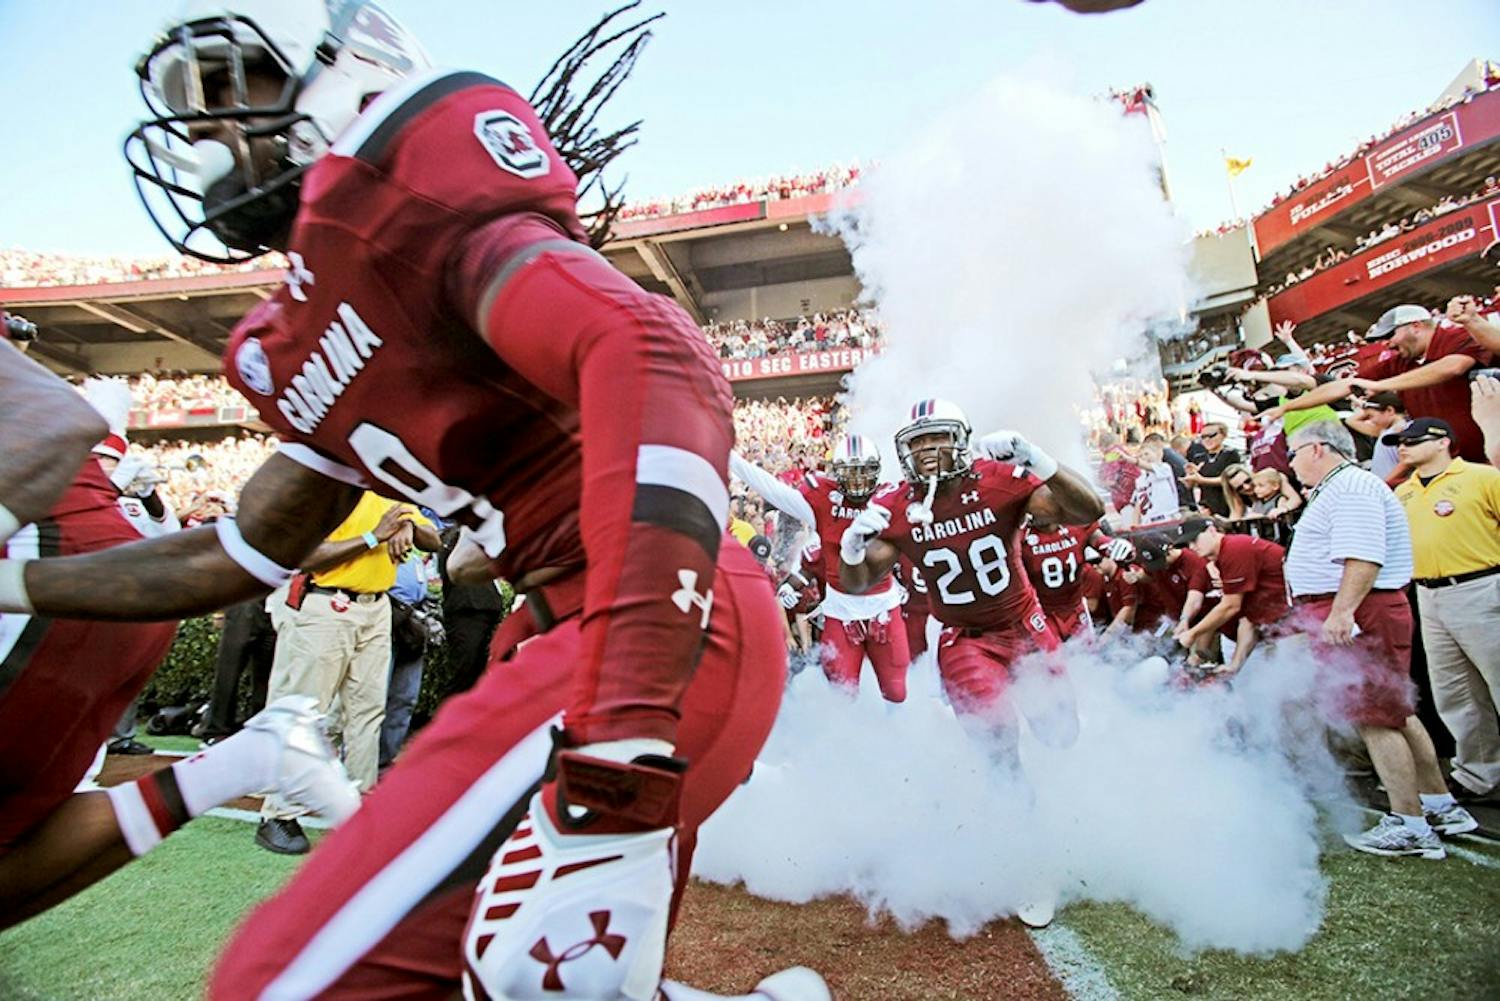 South Carolina running back Mike Davis (28) and the rest of the Gamecocks head onto the field prior to the start of action against Texas A&amp;M at Williams-Brice Stadium in Columbia, S.C., on Thursday, Aug. 28, 2014. (Gerry Melendez/The State/MCT)